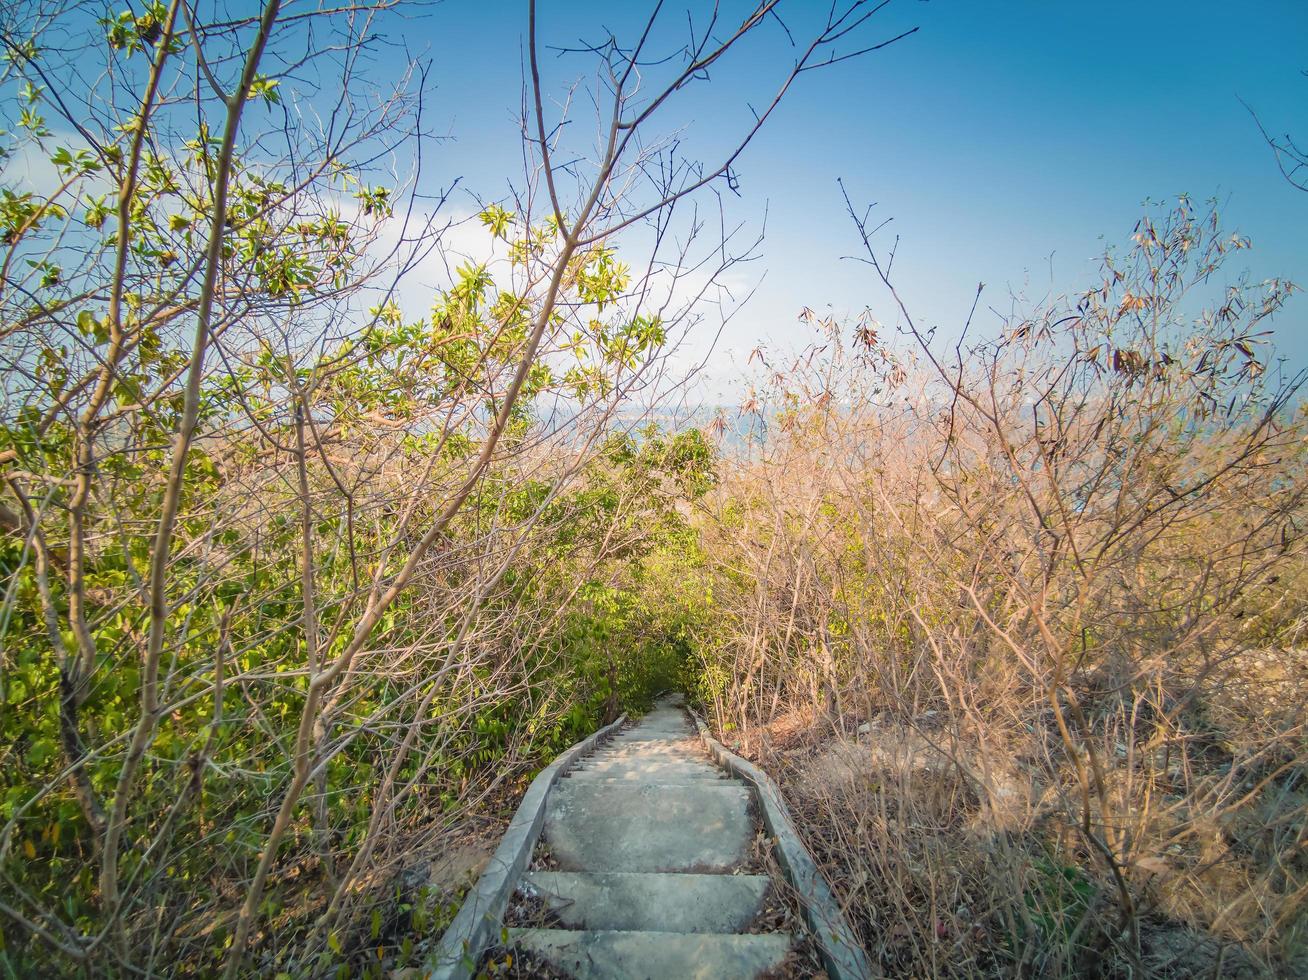 Beautiful nature and stairway to the top of koh lan island pattaya Thailand.Koh lan island is the Famous island near Pattaya city the Travel Destination in Thailand. photo